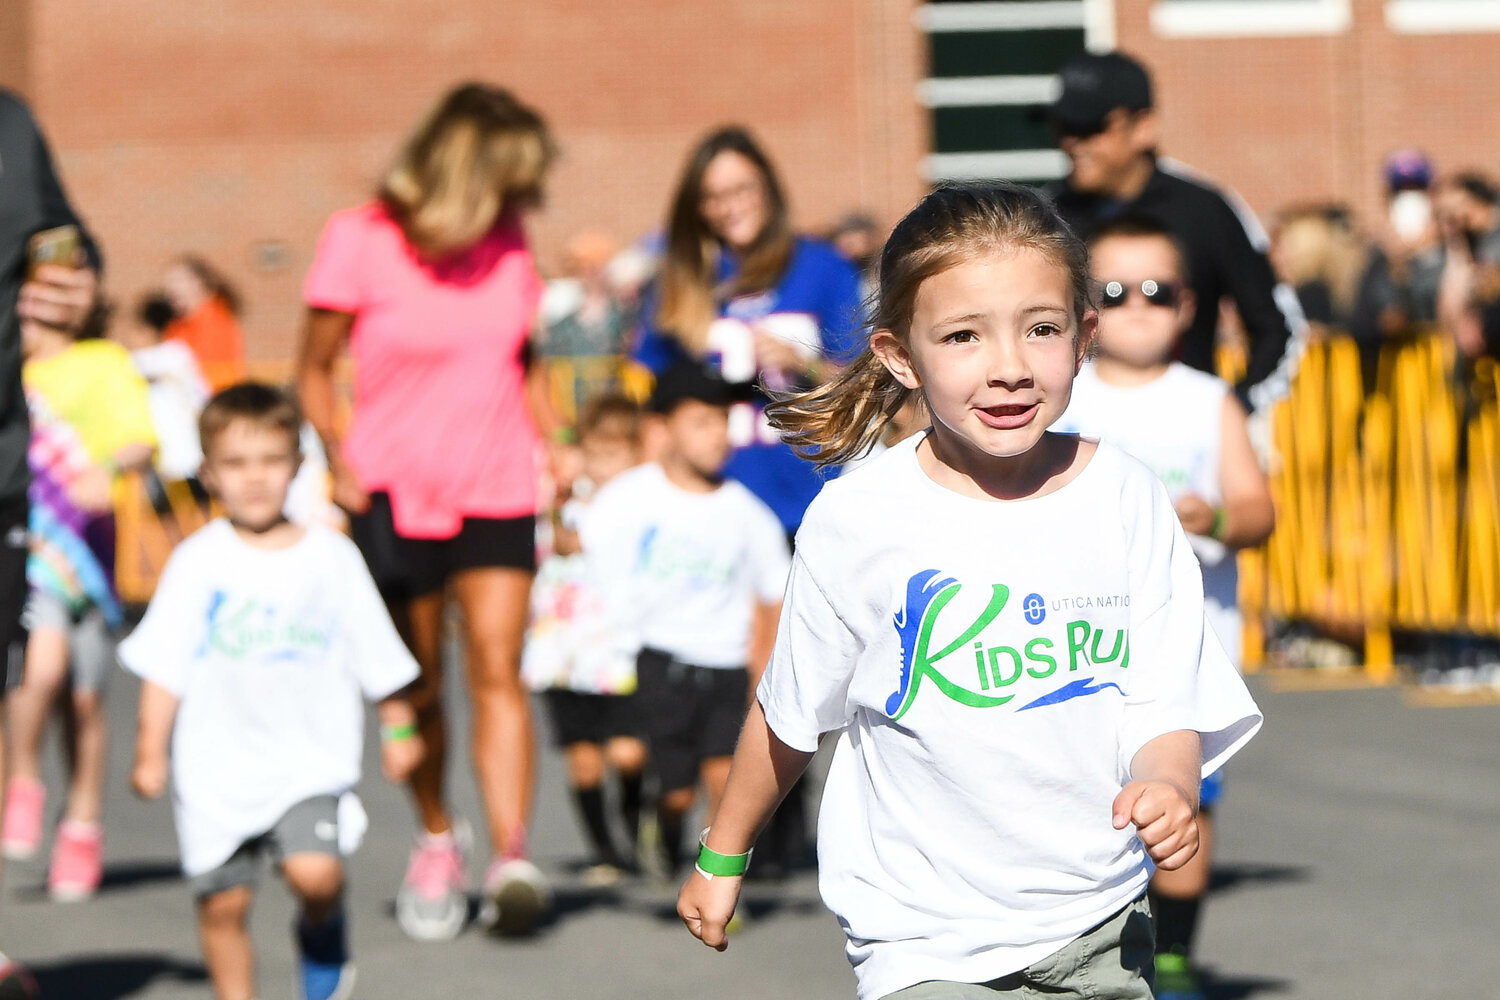 A young girl sprints toward the finish line during the 2022 Kids Run. The event takes place during Boilermaker Road Race weekend in Utica.